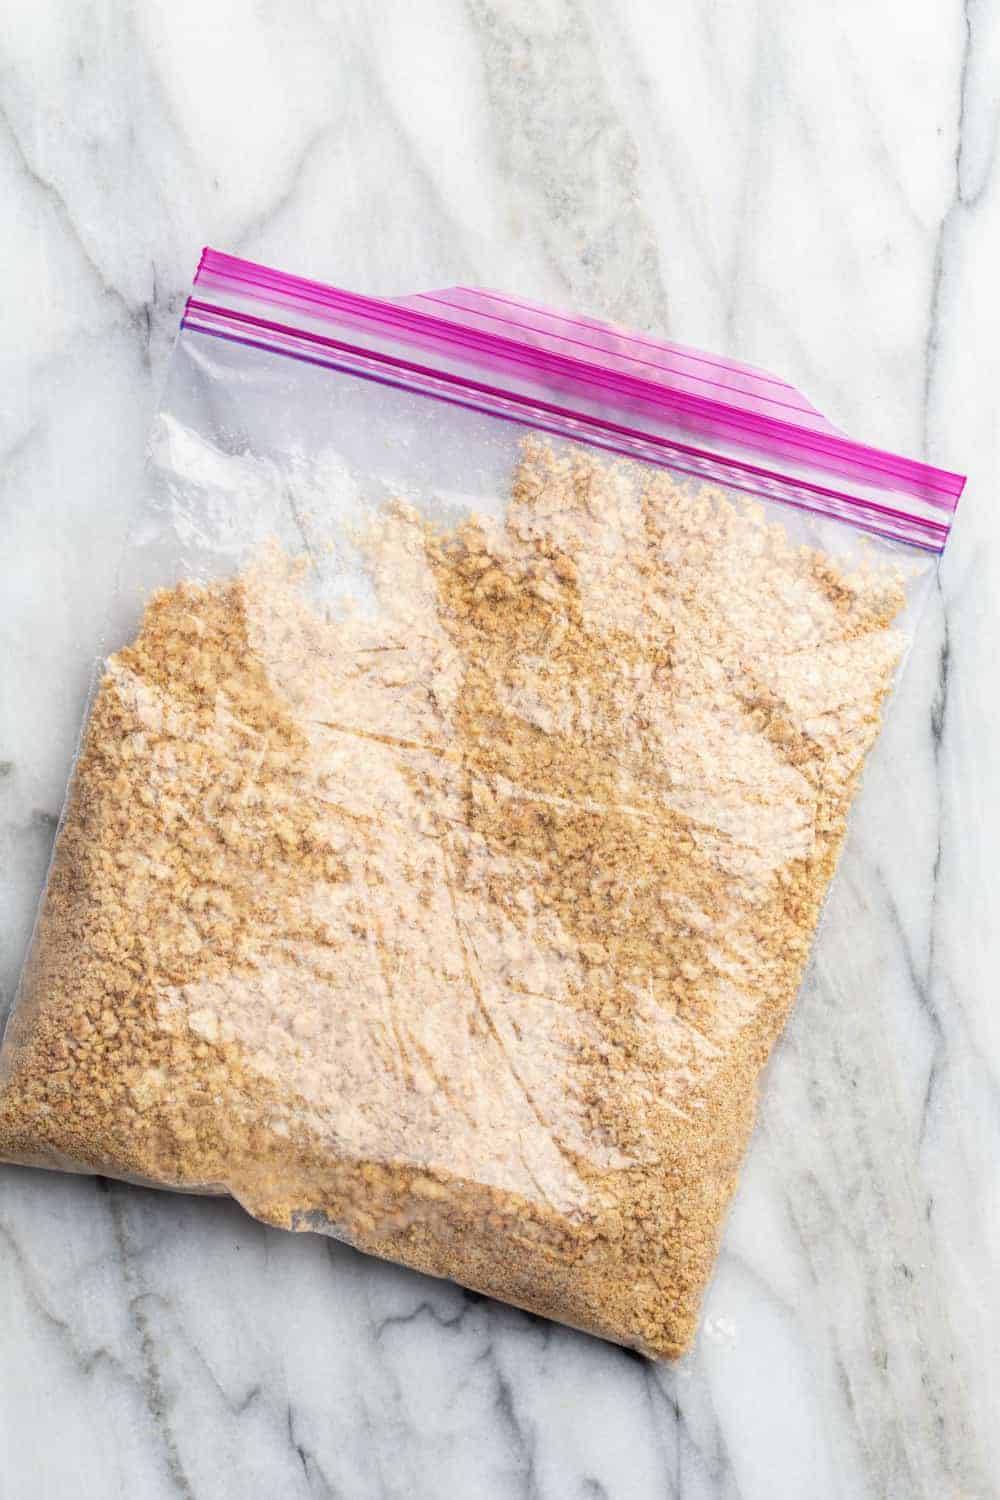 Zip-top bag of crushed graham cracker crumbs on a marble surface